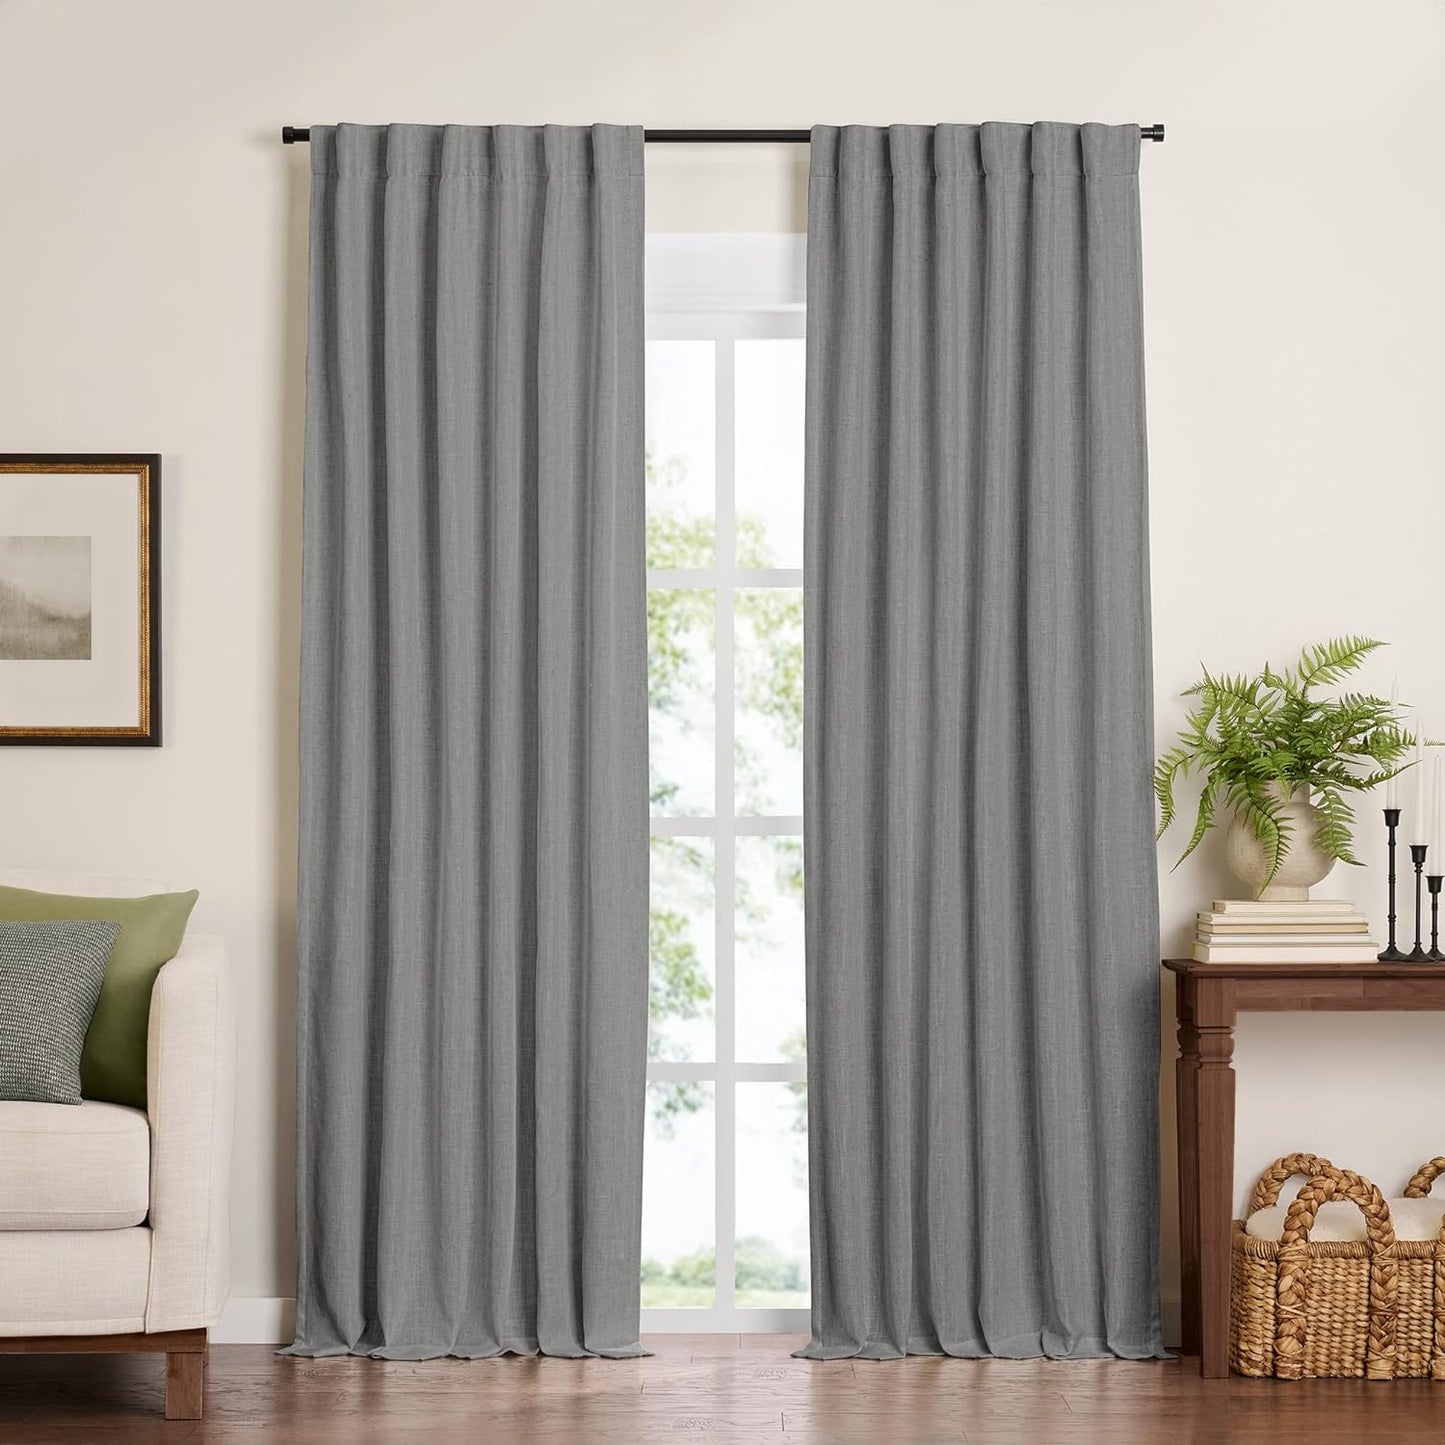 Elrene Home Fashions Harrow Solid Texture Blackout Single Window Curtain Panel, 52"X84", Natural  Elrene Home Fashions Dark Gray 52"X84" (1 Panel) 